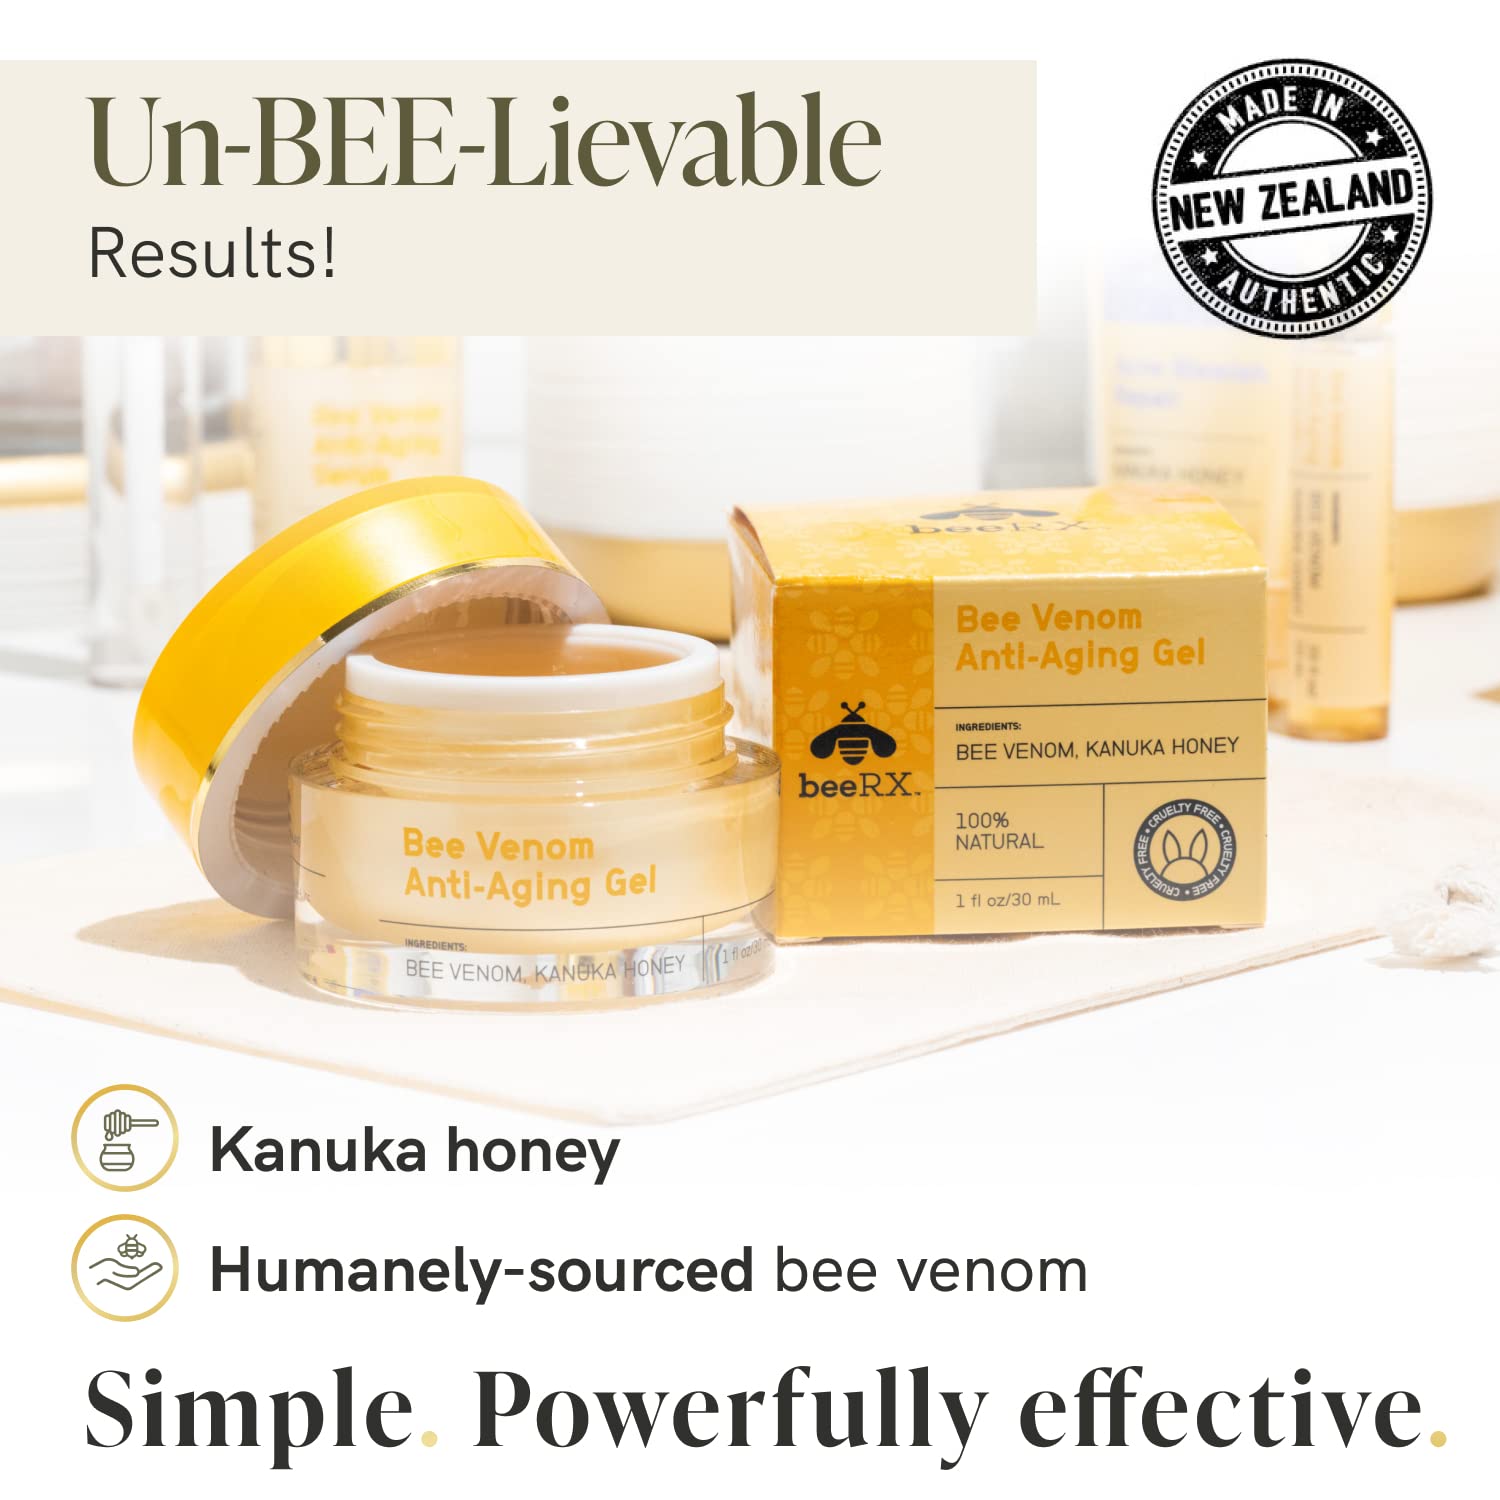 Bee Rx Anti-Aging Bee Venom Facial Gel Moisturizer - Anti-Wrinkle Cream Firming Face Cream - Natural Kanuka Honey Skin Care Products